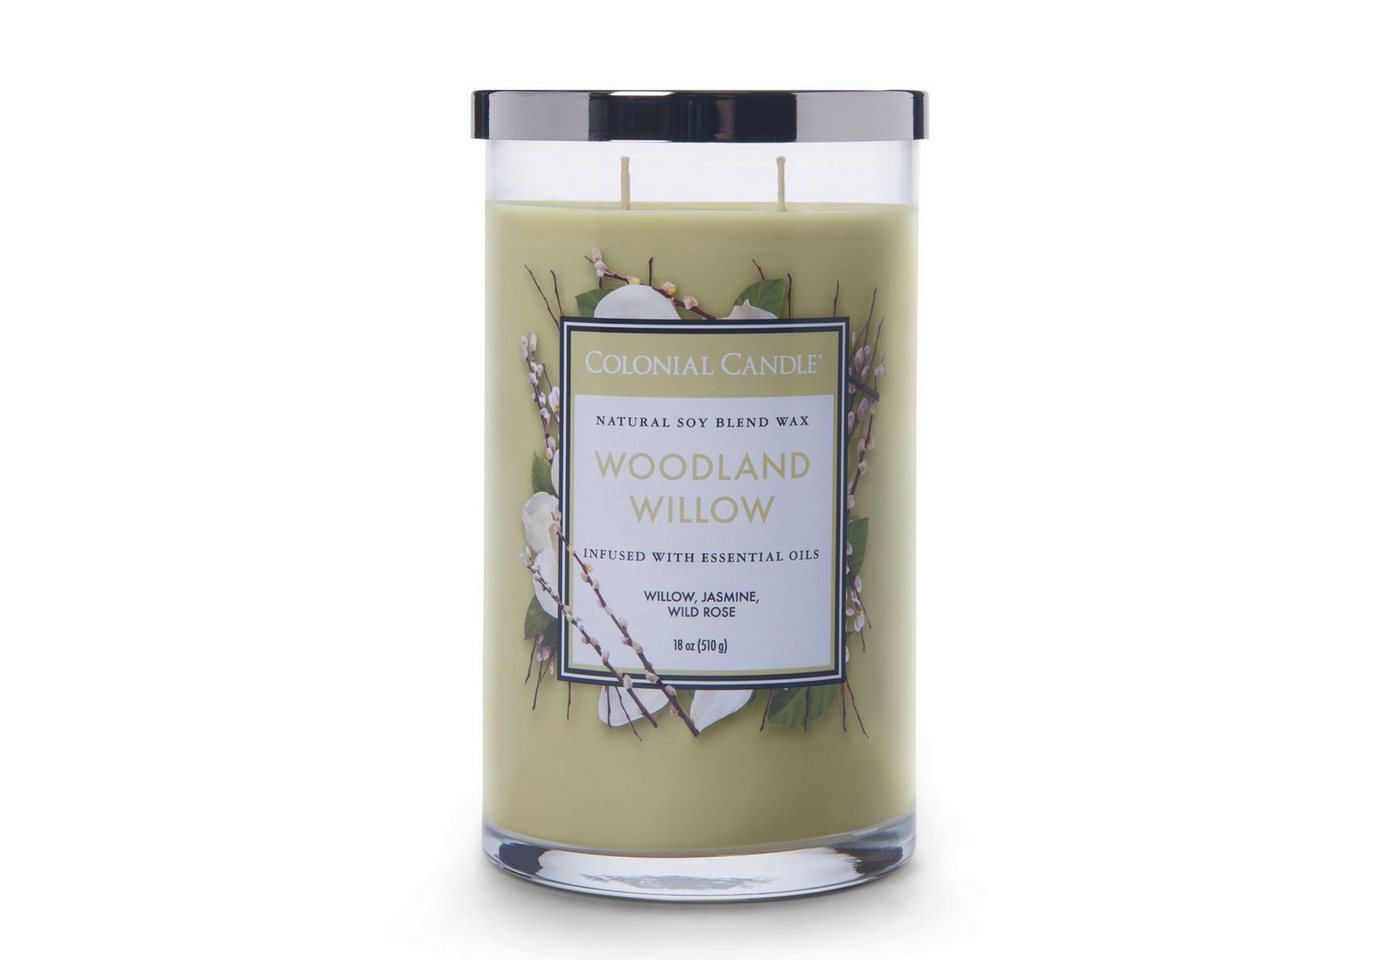 COLONIAL CANDLE Duftkerze Duftkerze Woodland Willow - 538g (1.tlg) von COLONIAL CANDLE